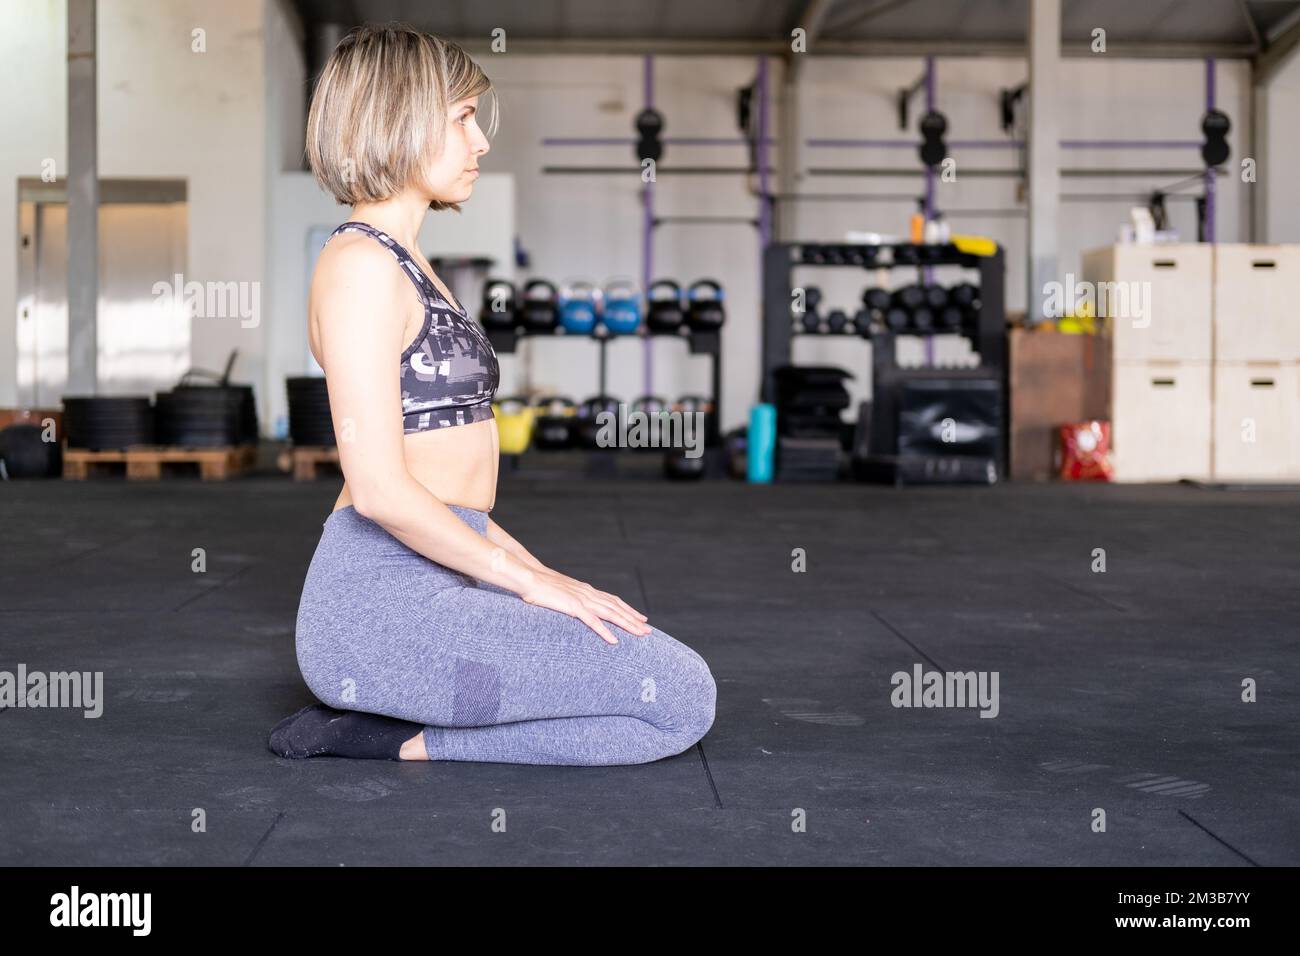 A blond mid adult woman resting in kneeling or vajrasana pose during her vinyasa flow yoga practice alone and wearing leggings and a sports bra in a g Stock Photo